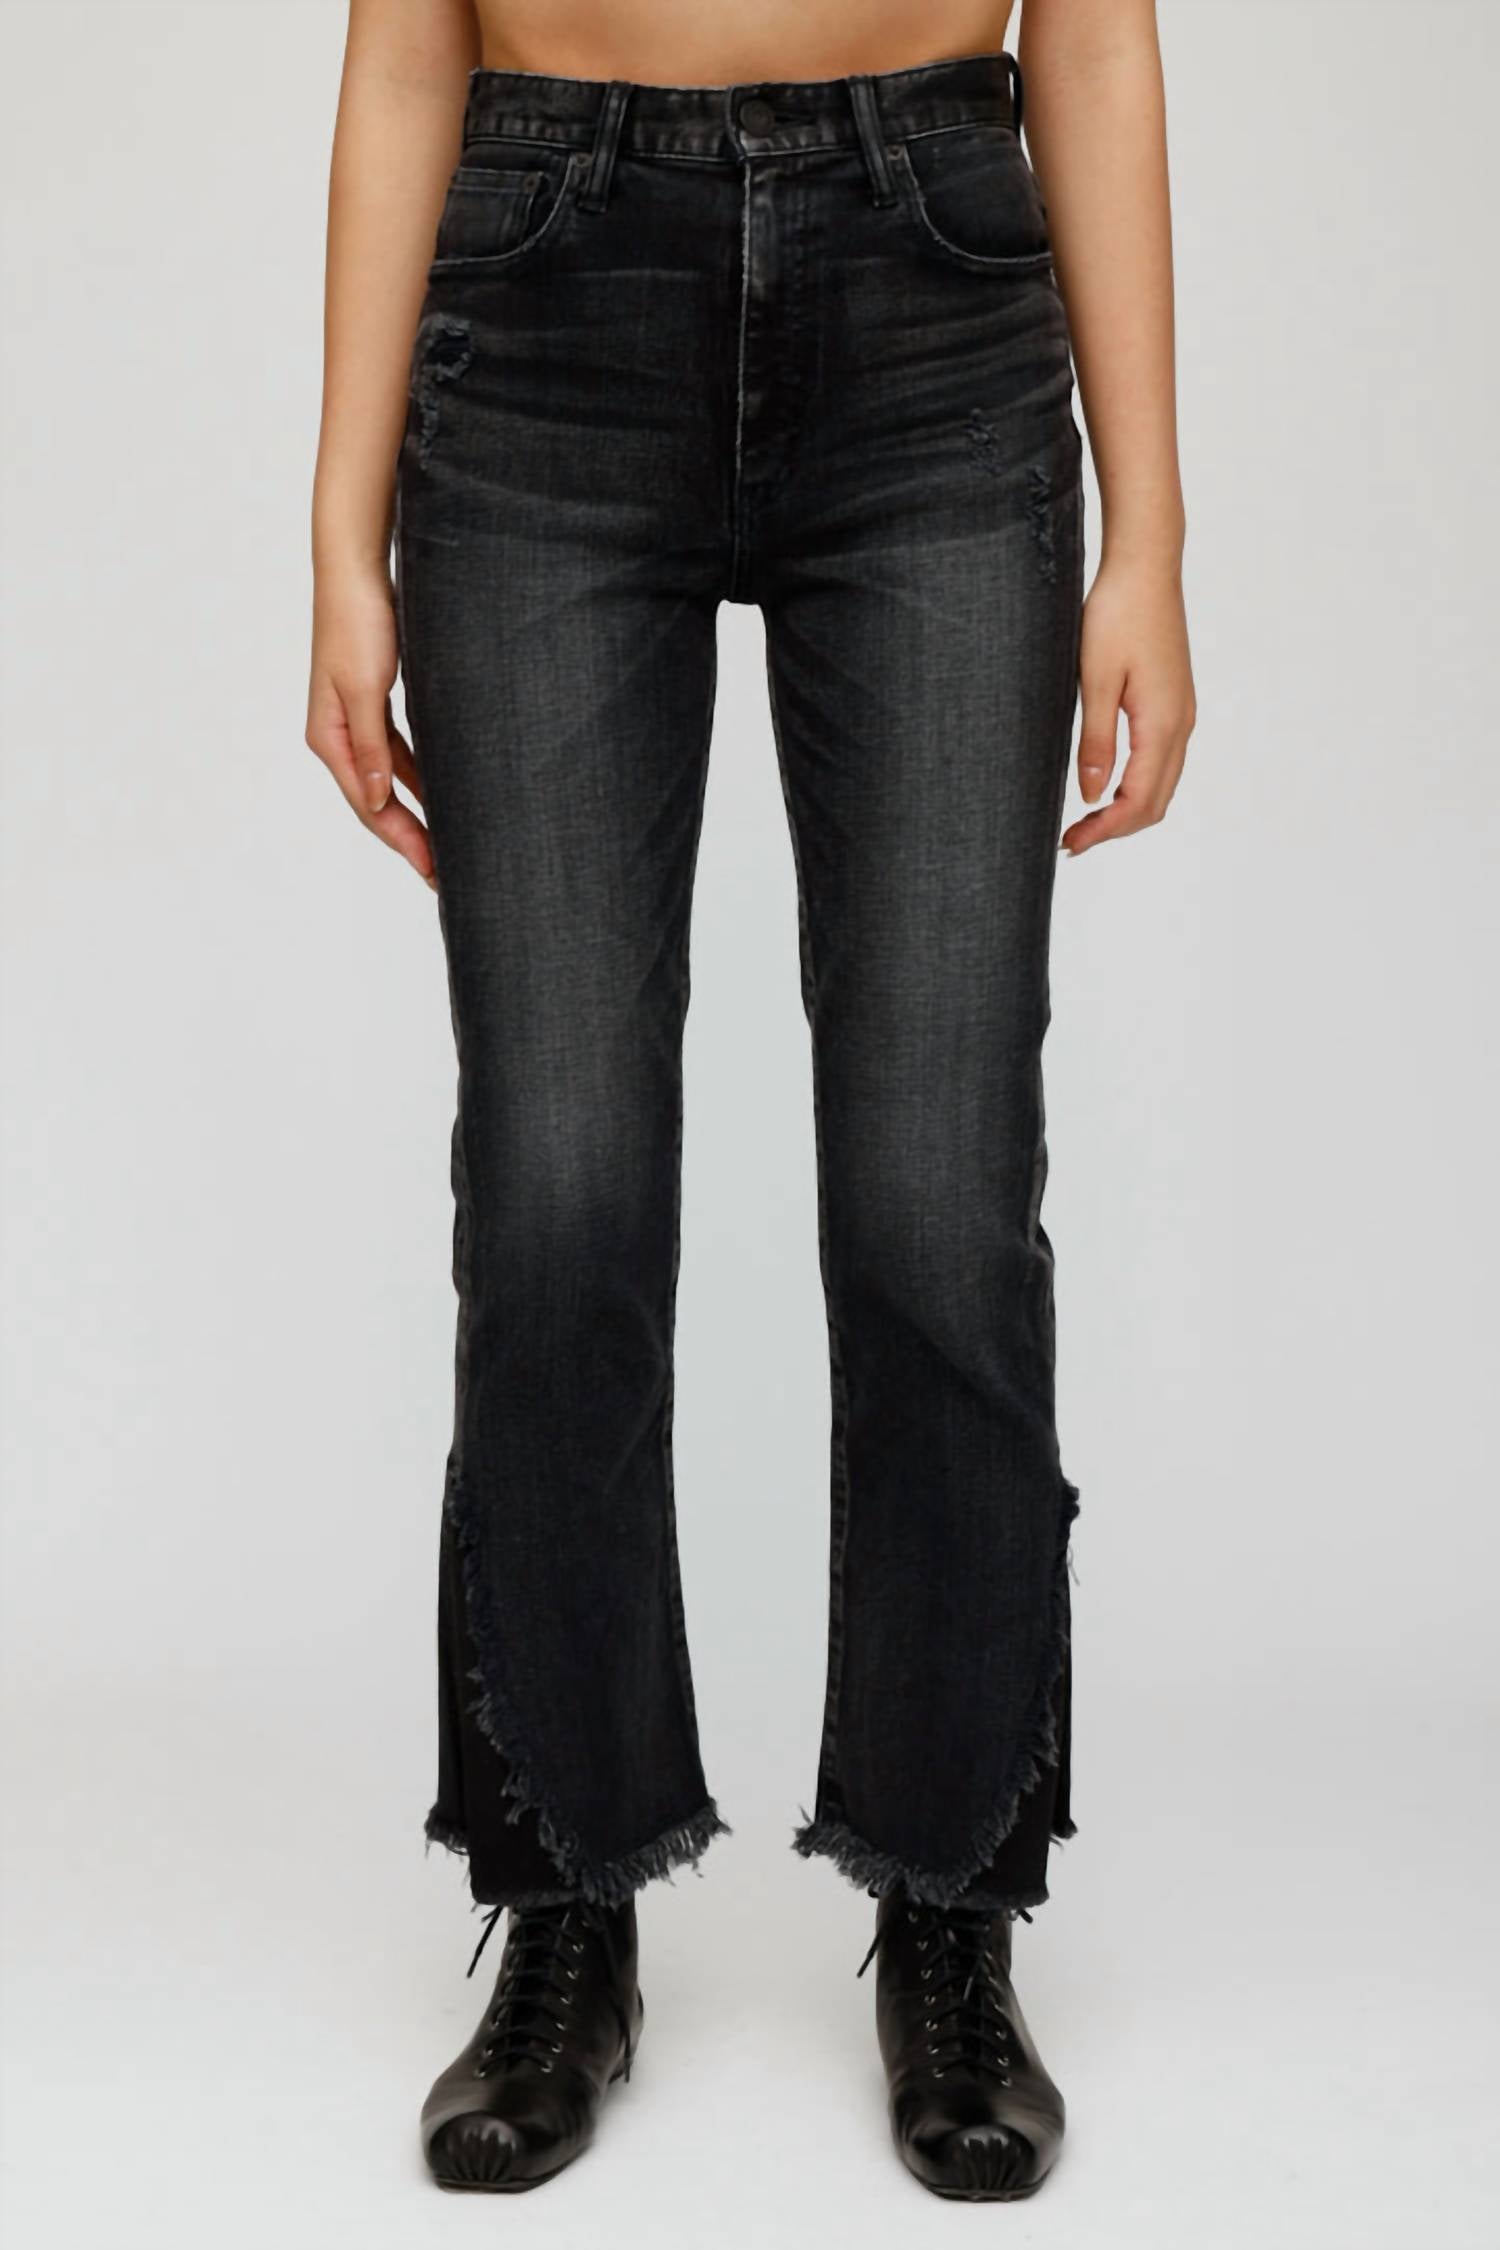 MOUSSY Alahambra Flare High Rise Jean in Black